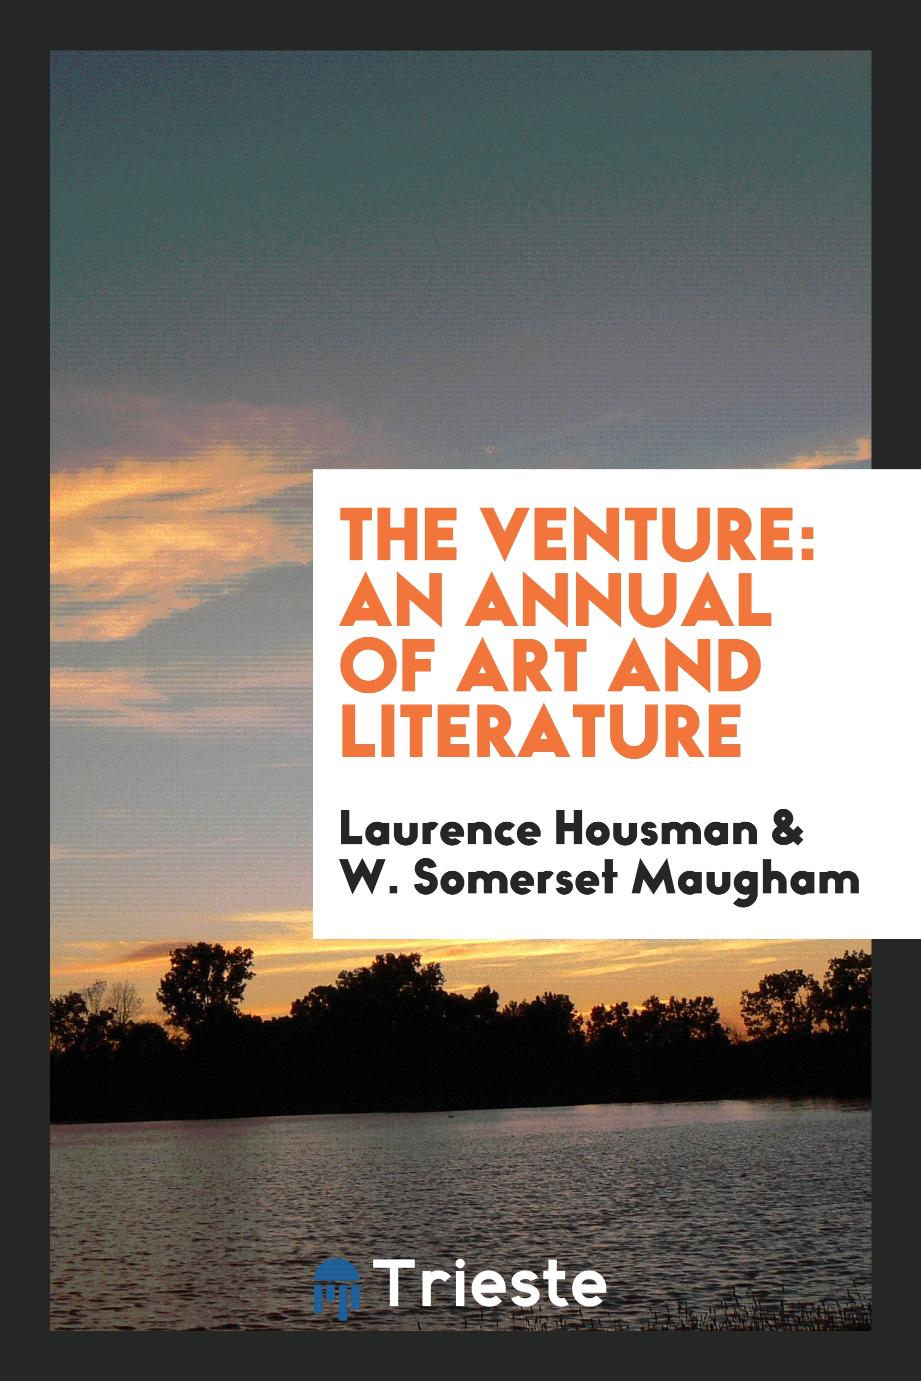 The venture: an annual of art and literature